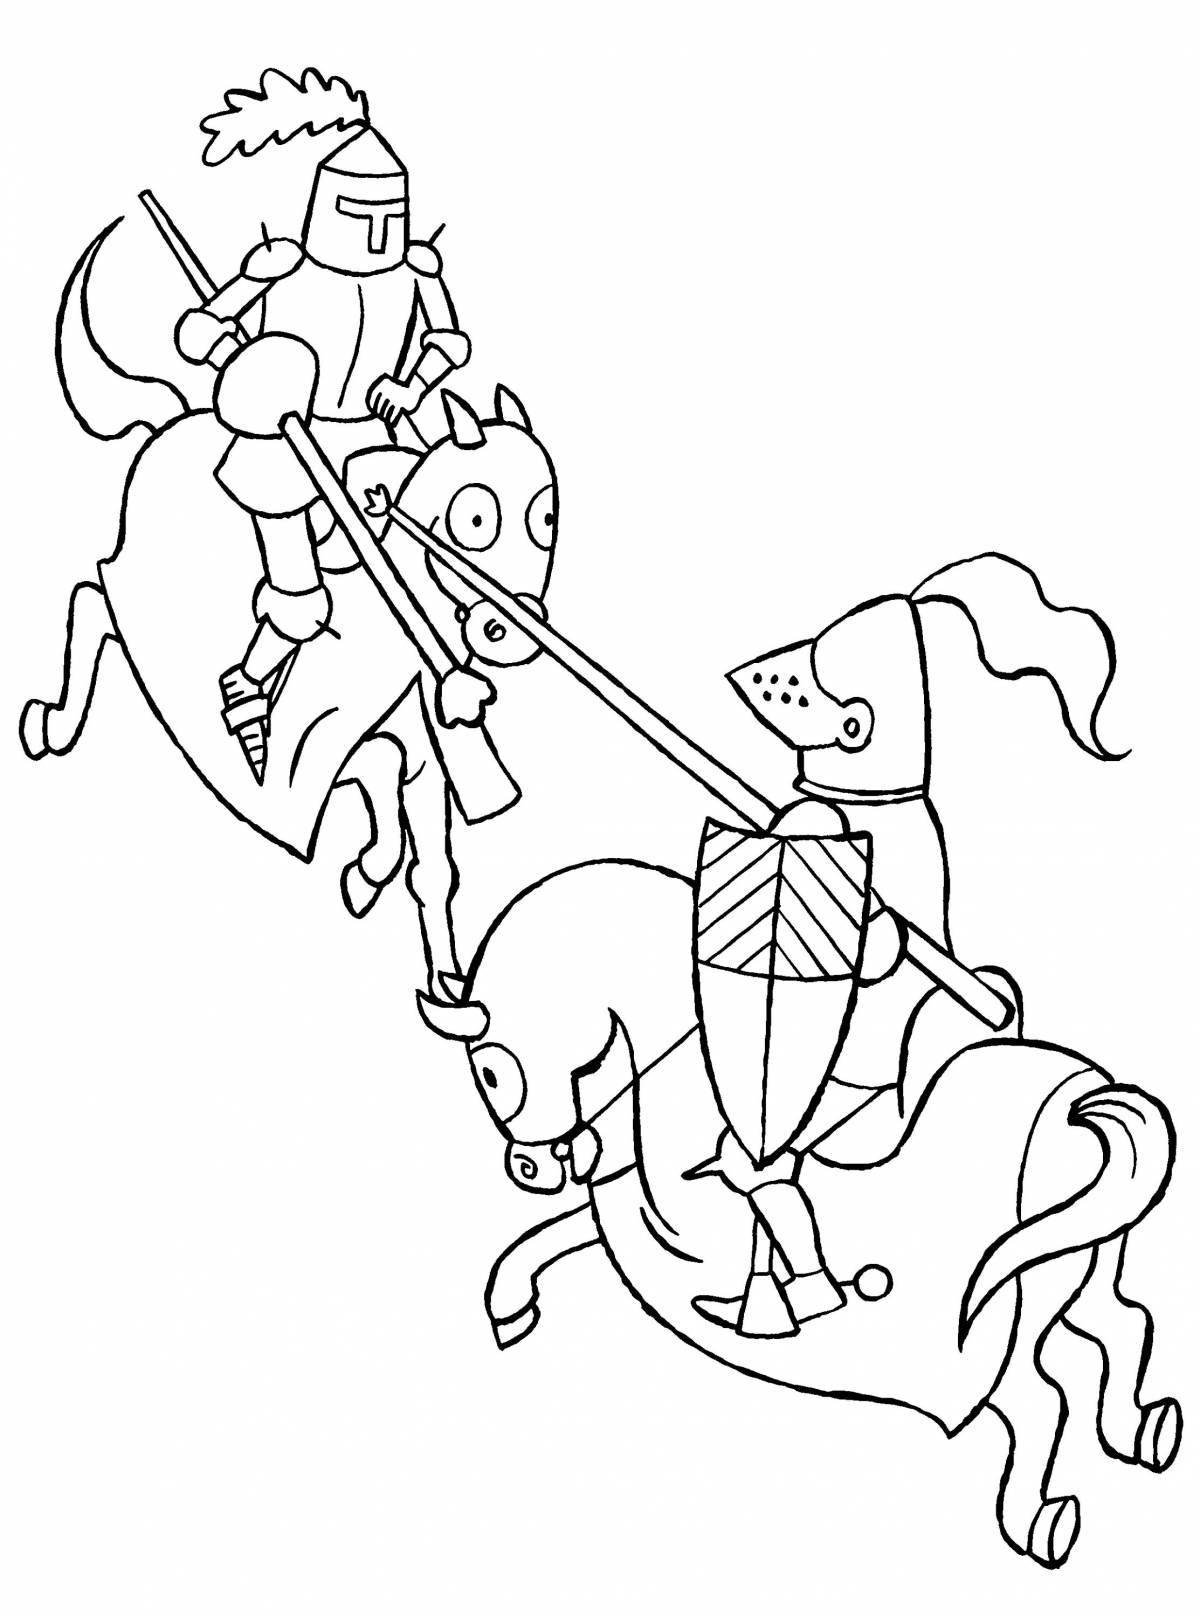 Dazzling Ice Battle coloring page